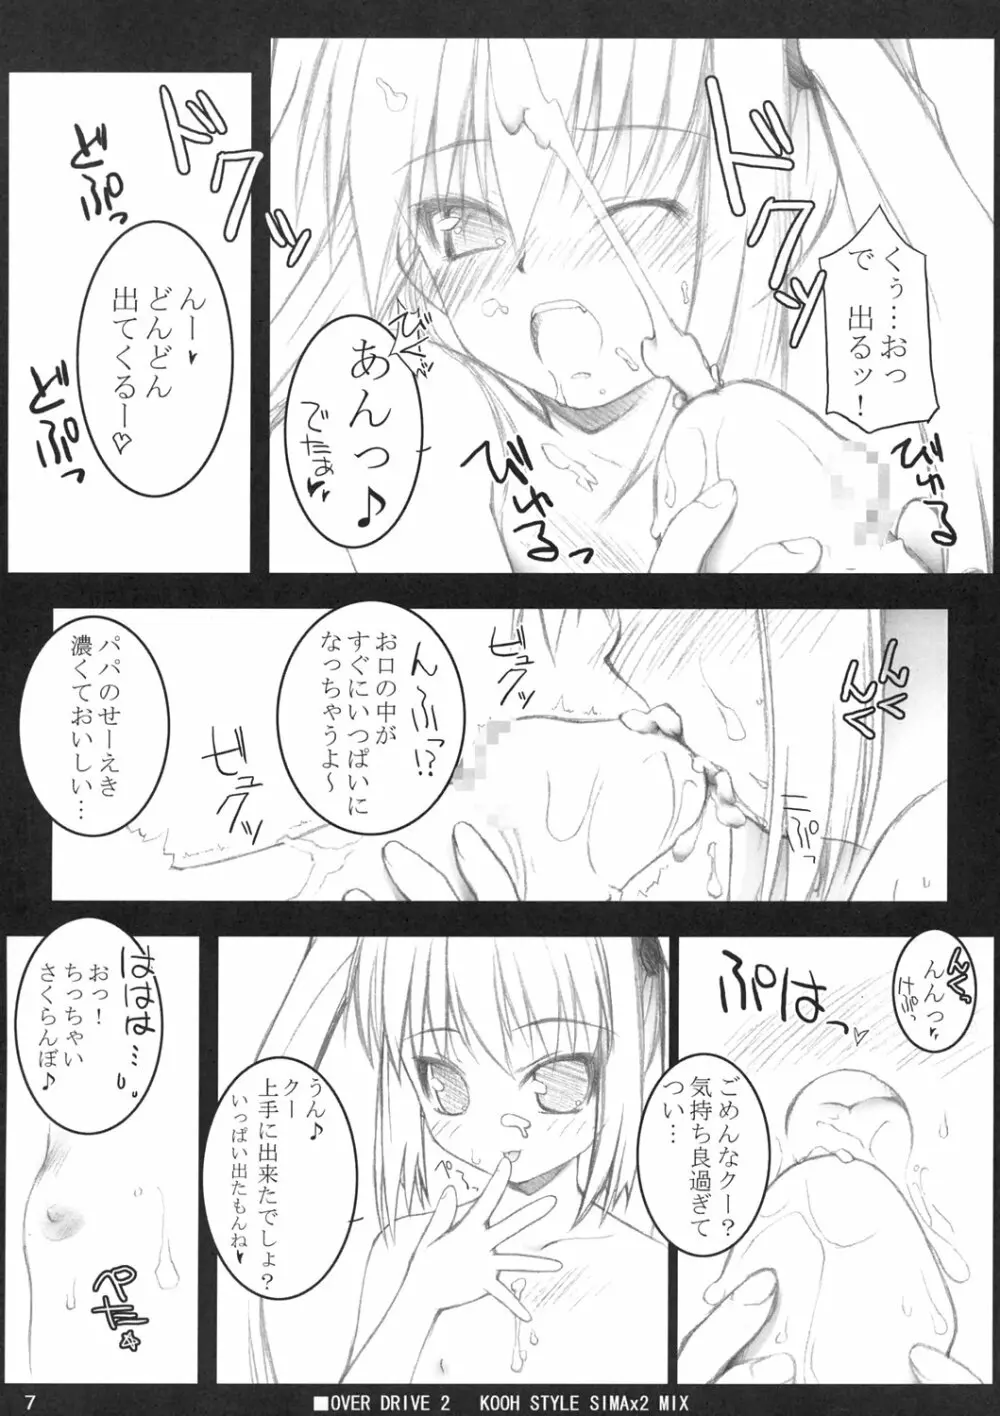 OVER DRIVE 2 KOOH STYLE SIMAx2 MIX Page.6